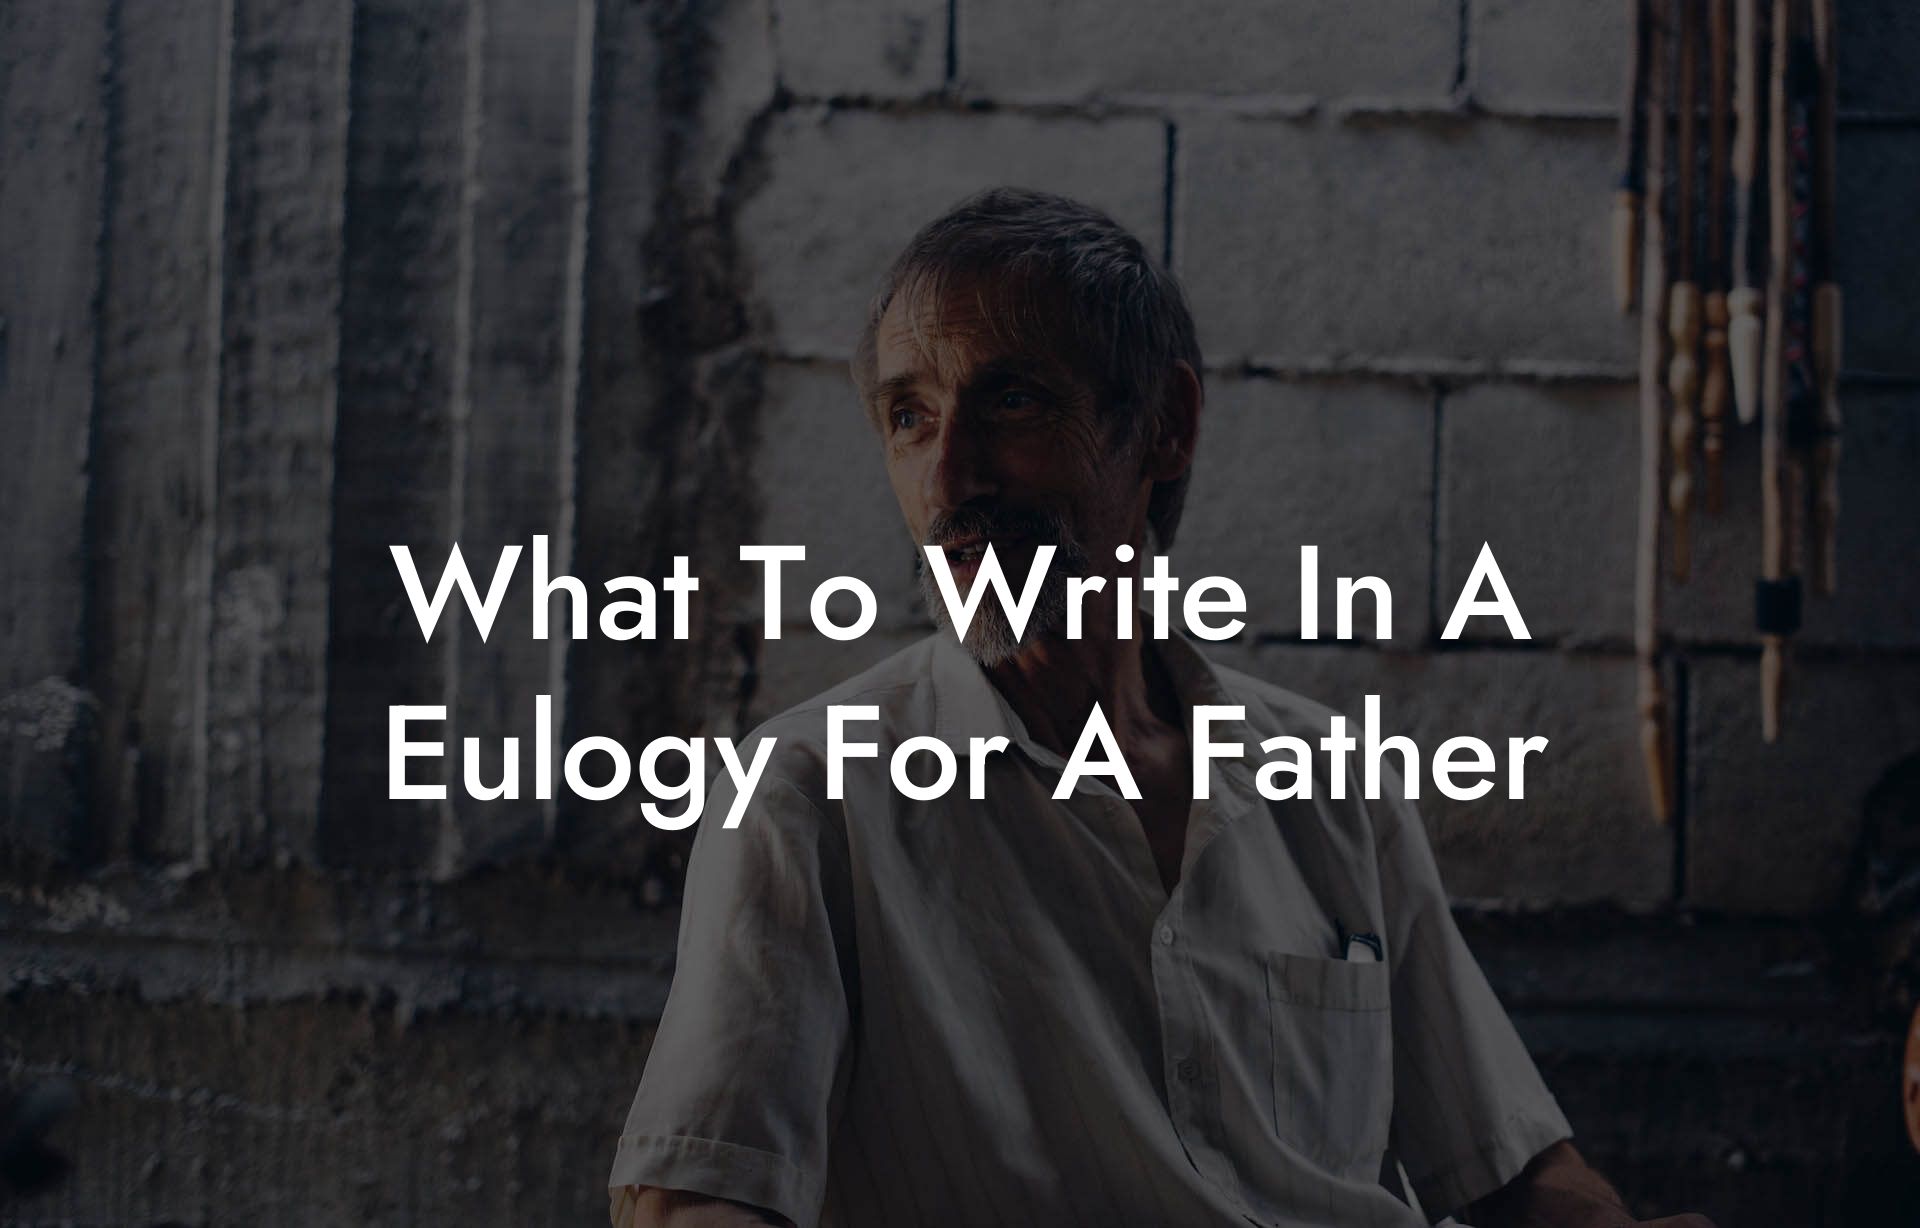 What To Write In A Eulogy For A Father